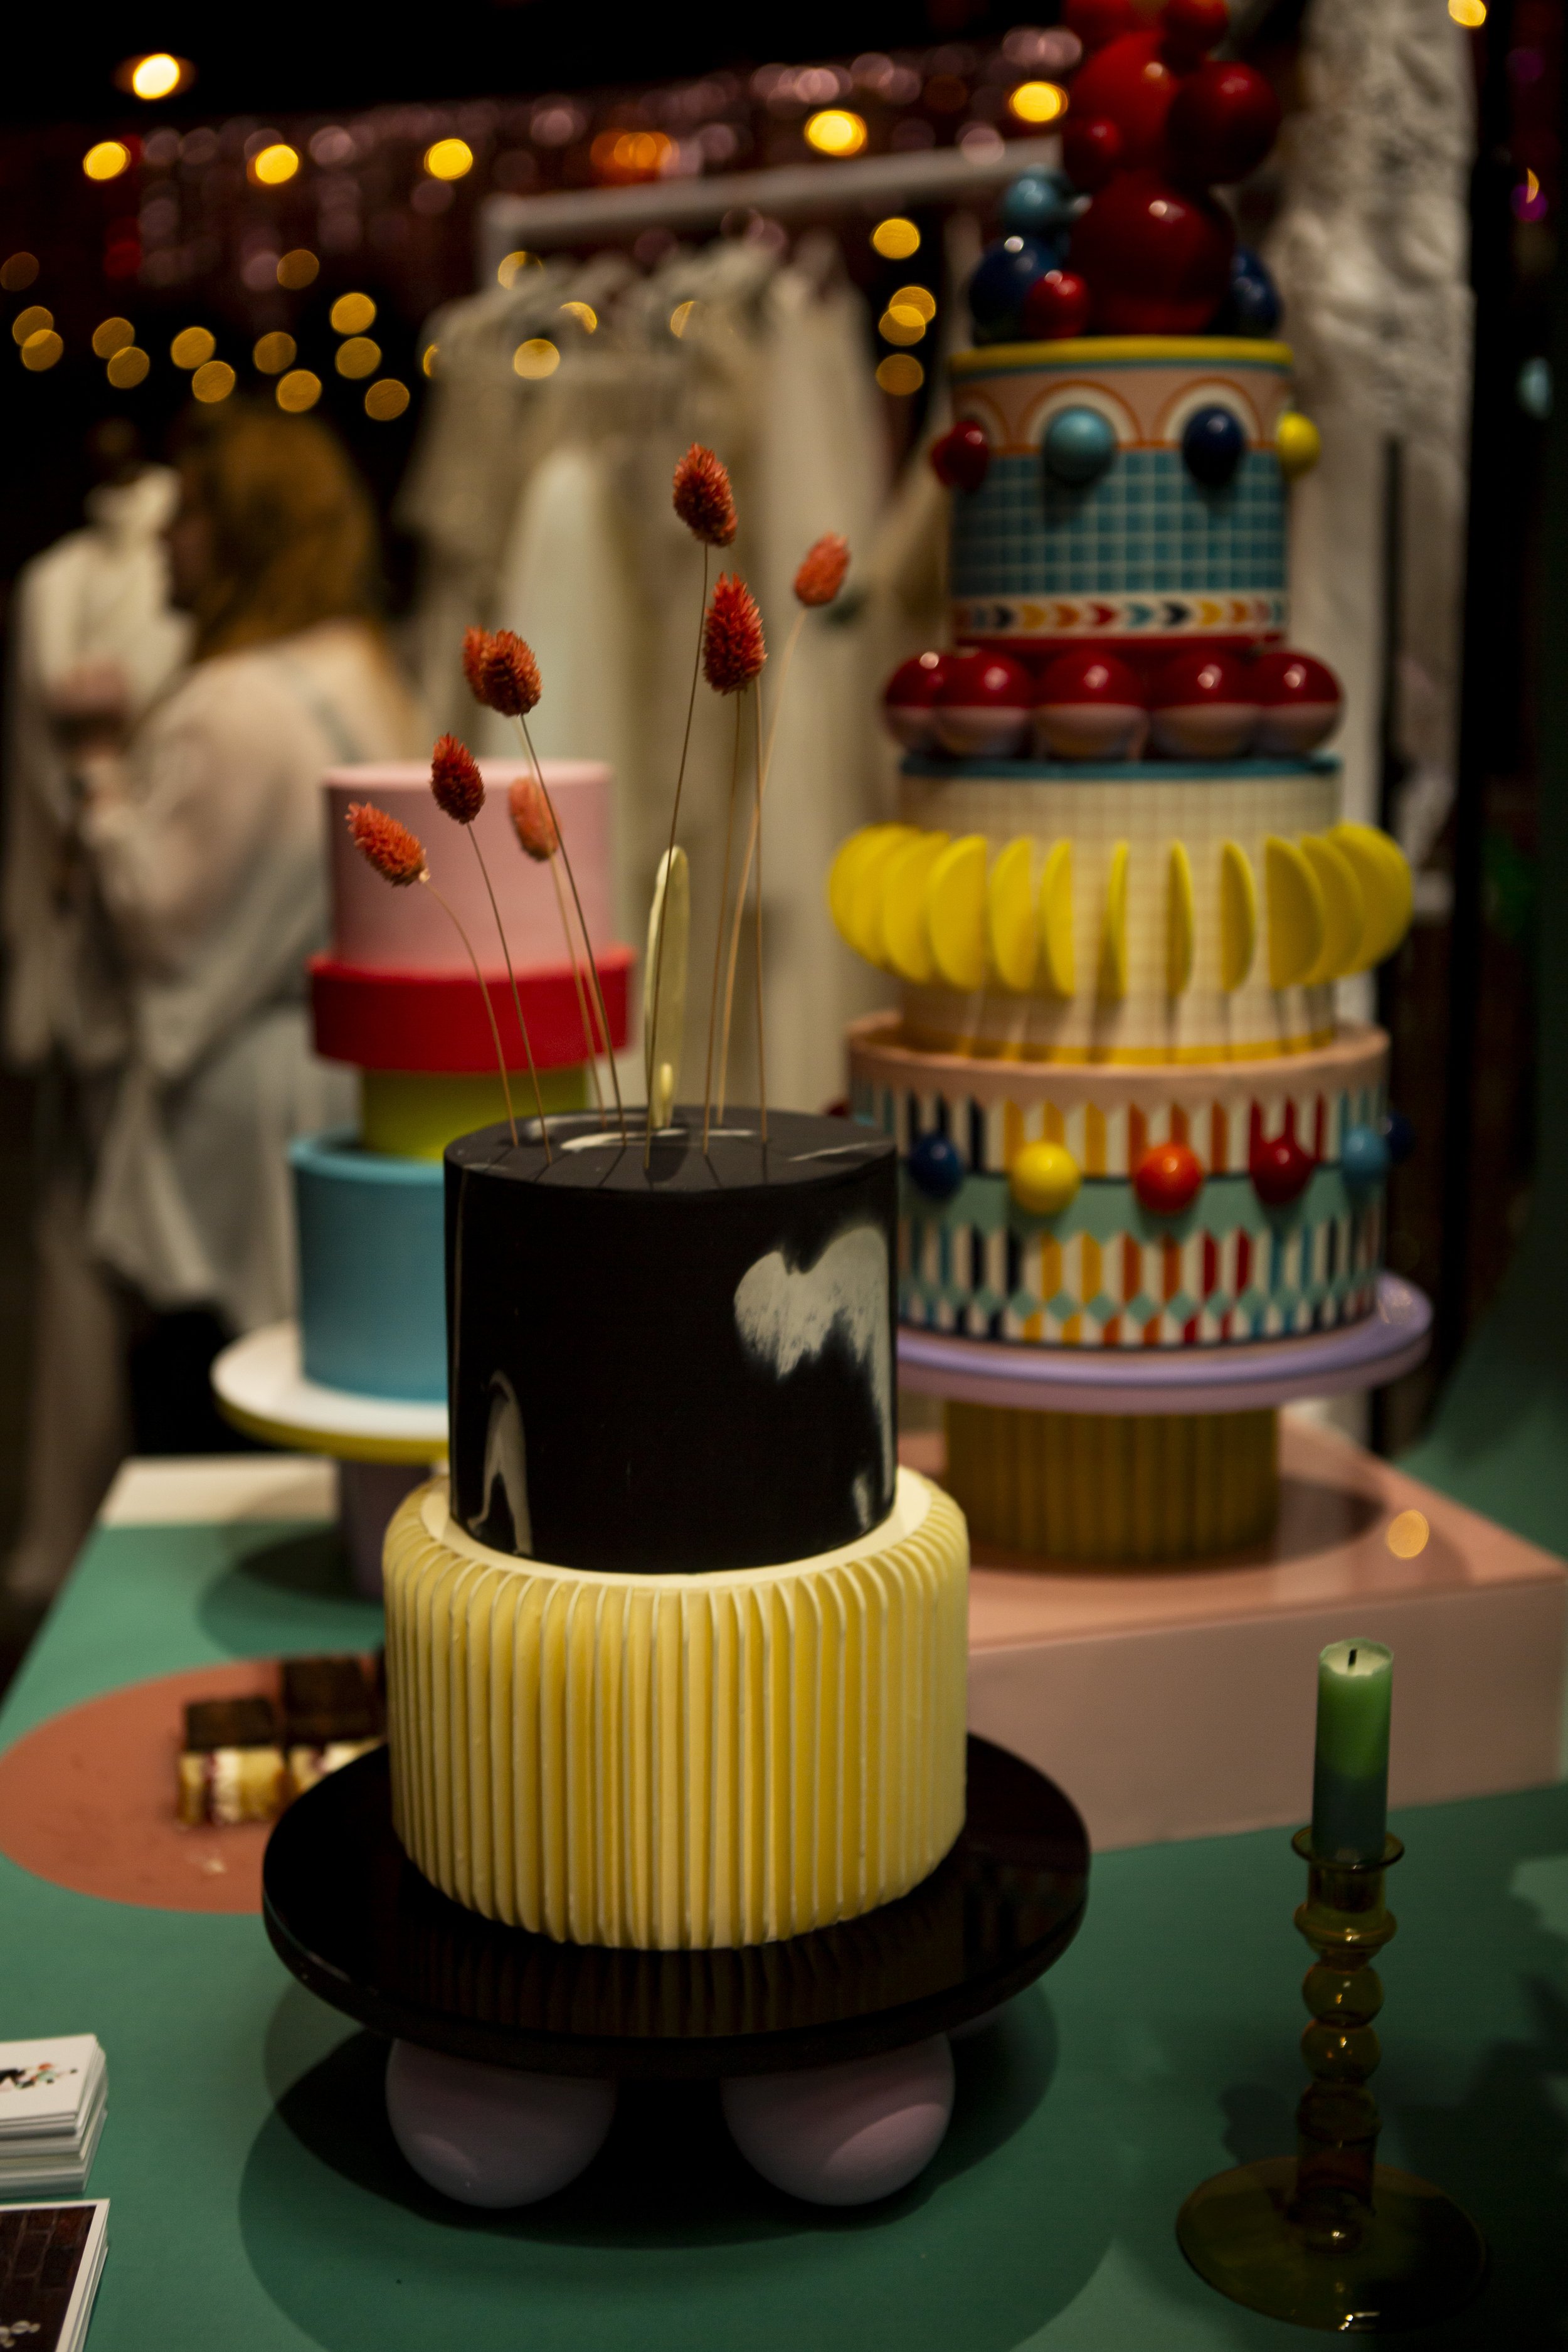  Wedding cakes that look to good to be real!  ARD Bakery showcased their incredible wedding cakes at TUWS Scotland at The Engine Works in Glasgow.  